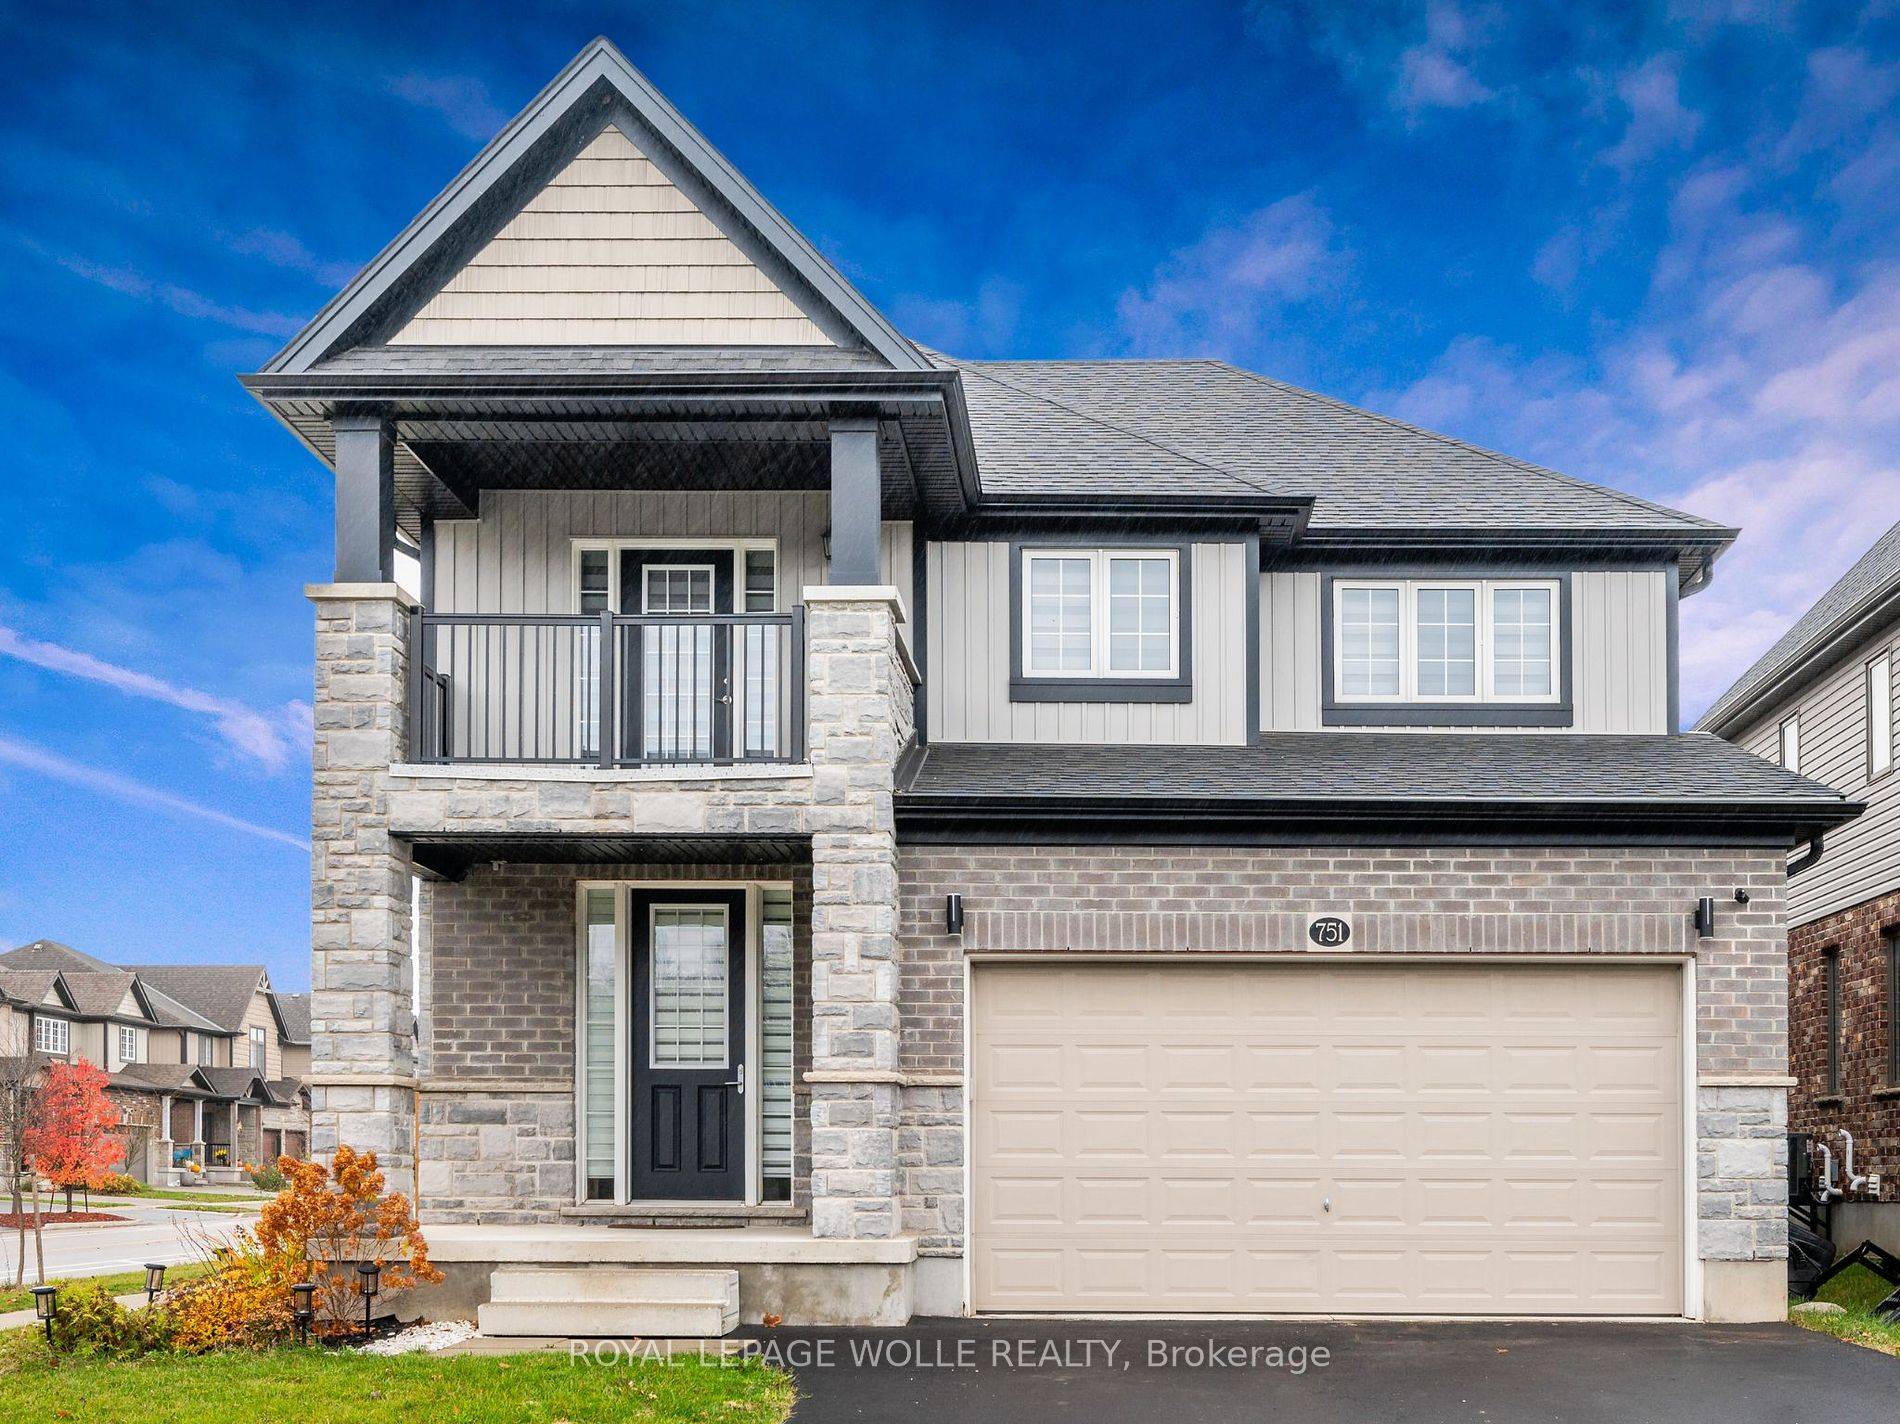 This 4 2 bedroom, 3. 5 bathroom former Activa Model Home ; on a 51 ft lot with a 2 car garage.